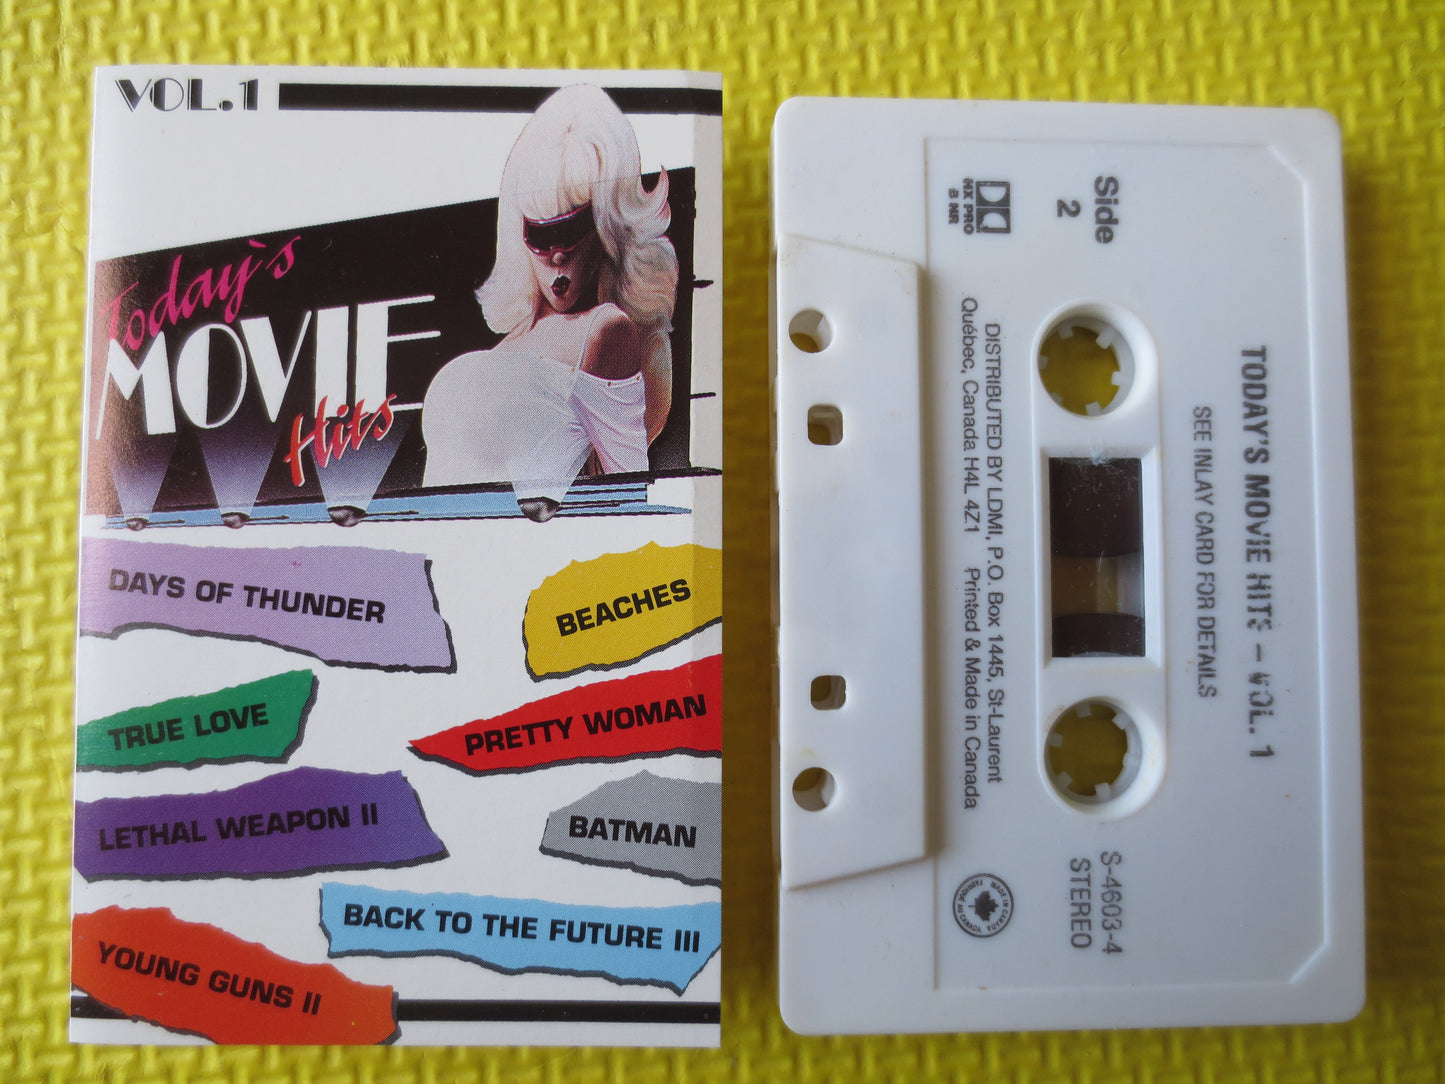 Today's MOVIE HITS, Volume 1, MOVIE Songs, Soundtrack Tapes, Tape Cassette, Movie lp, Tapes, Rock Cassette, Cassette Music